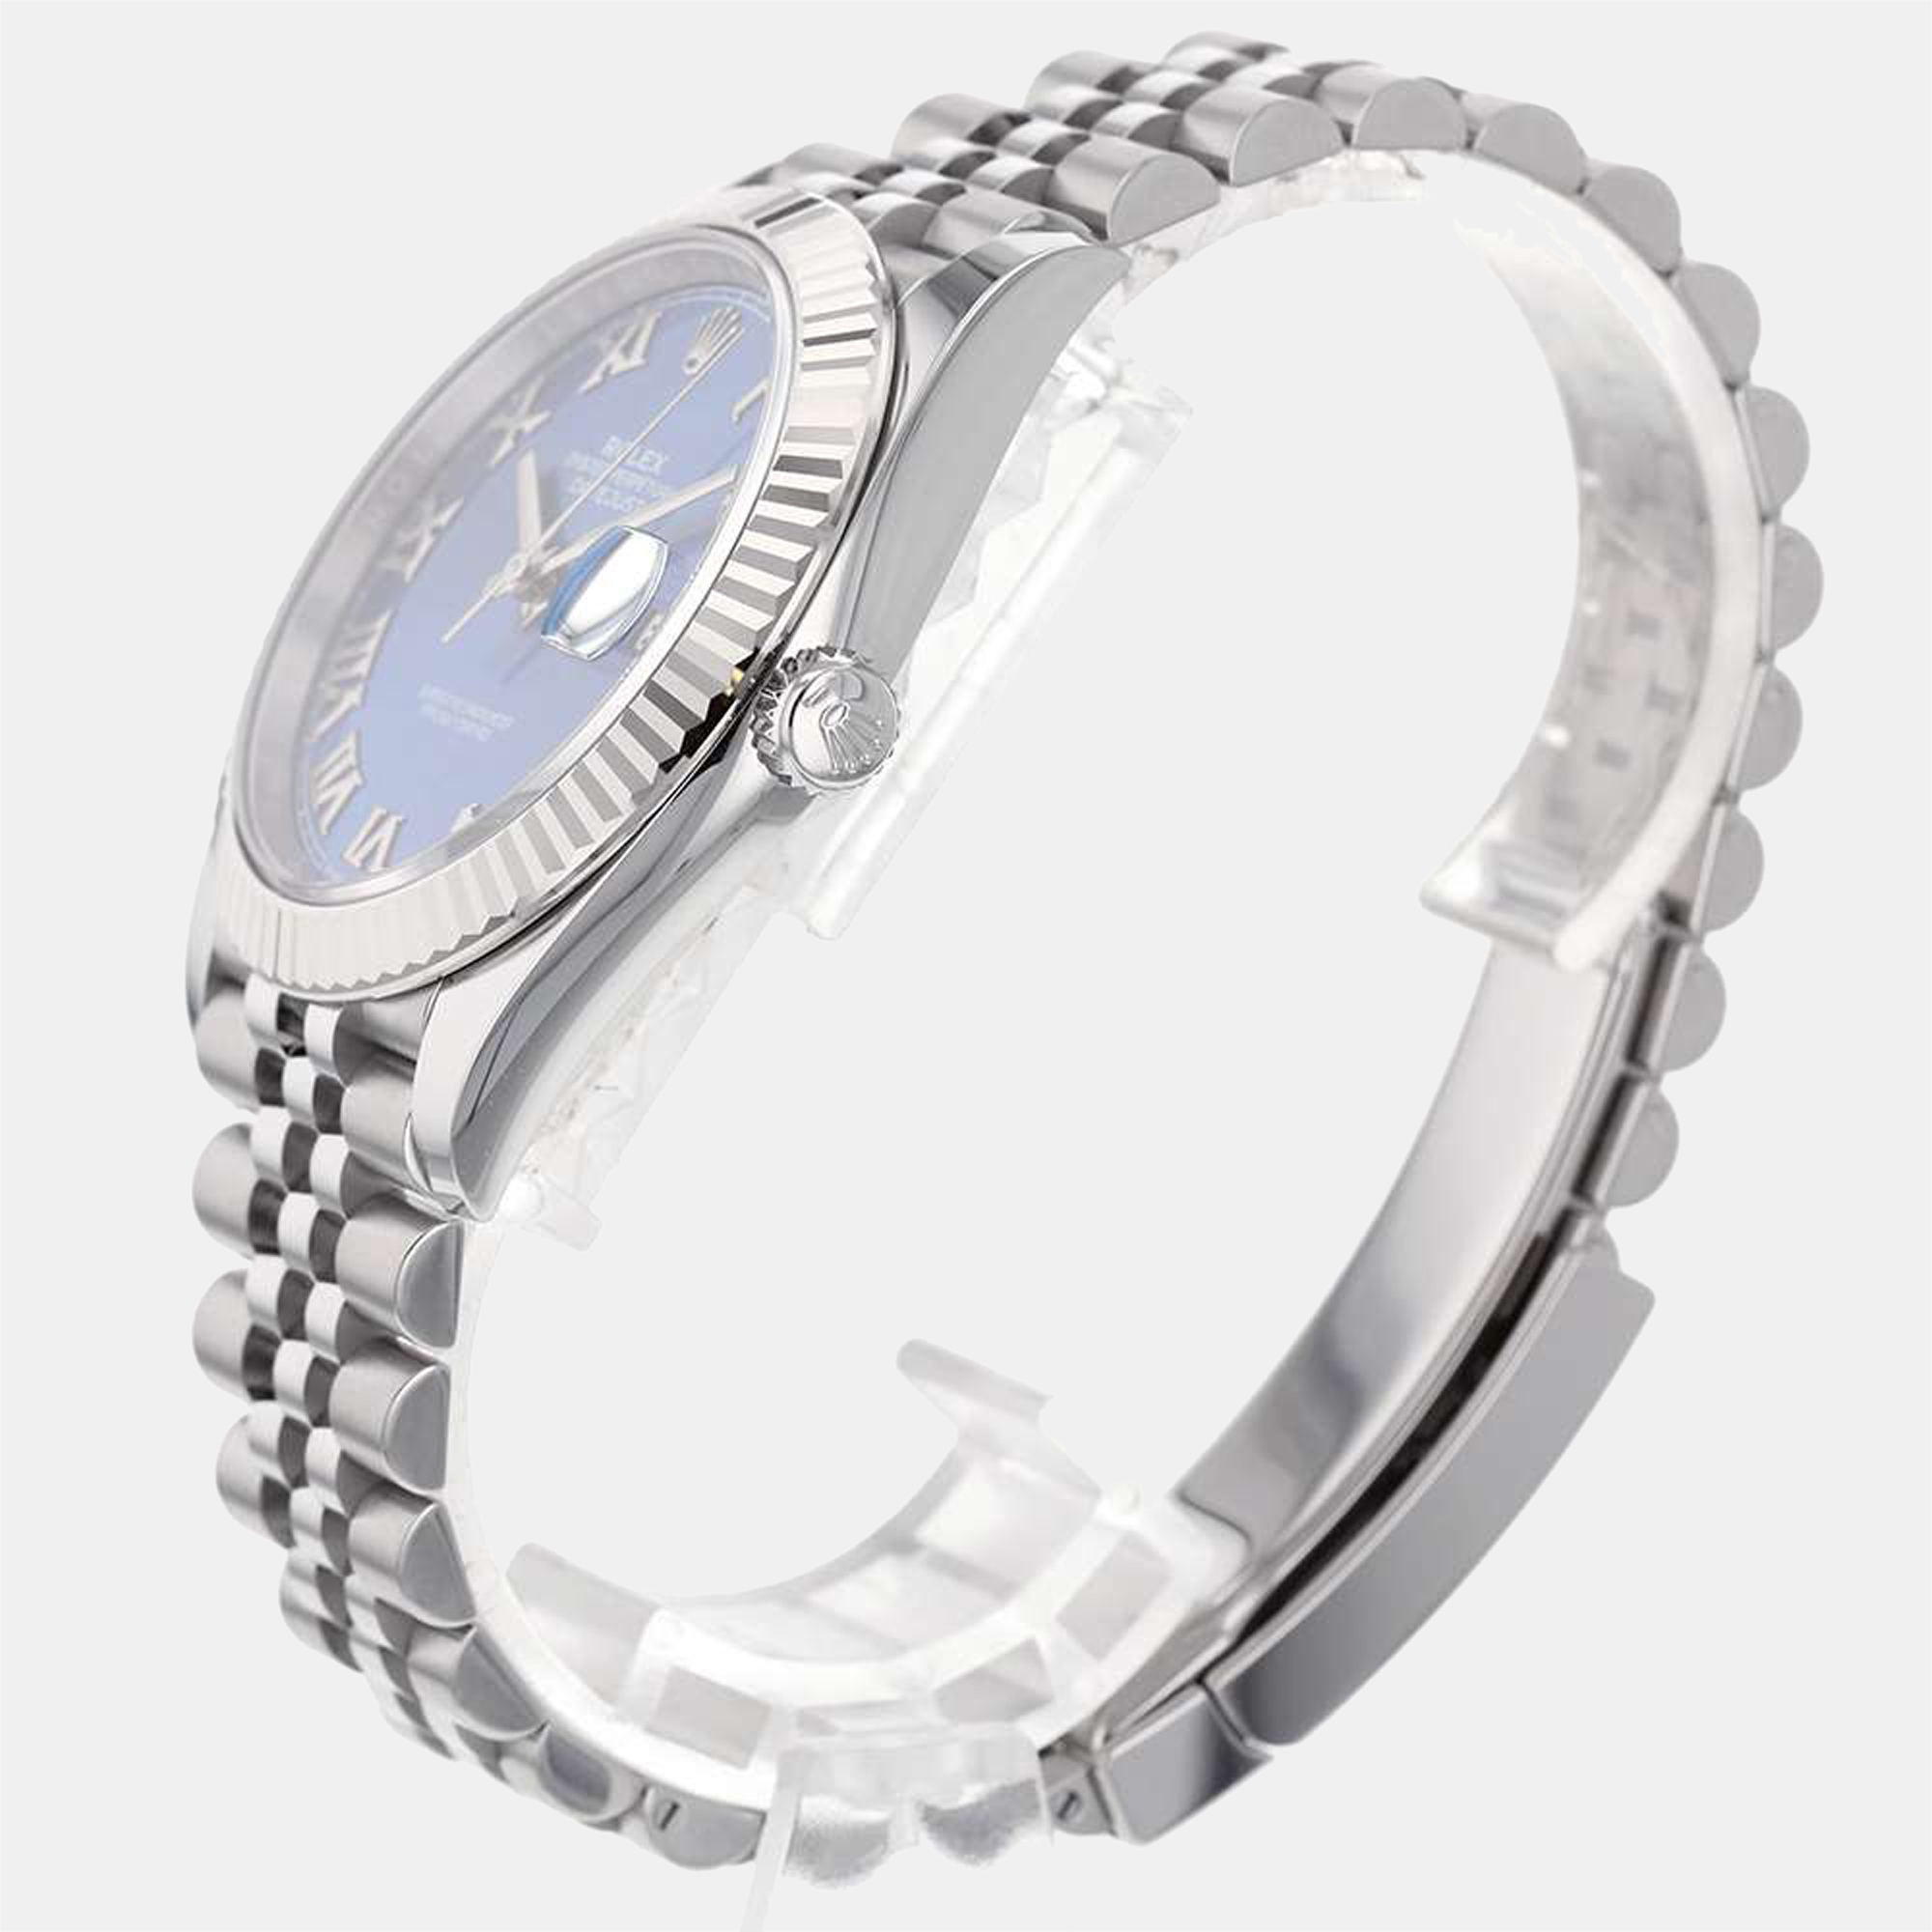 

Rolex Blue 18K White Gold And Stainless Steel Datejust 126334 Automatic Men's Wristwatch 41 mm